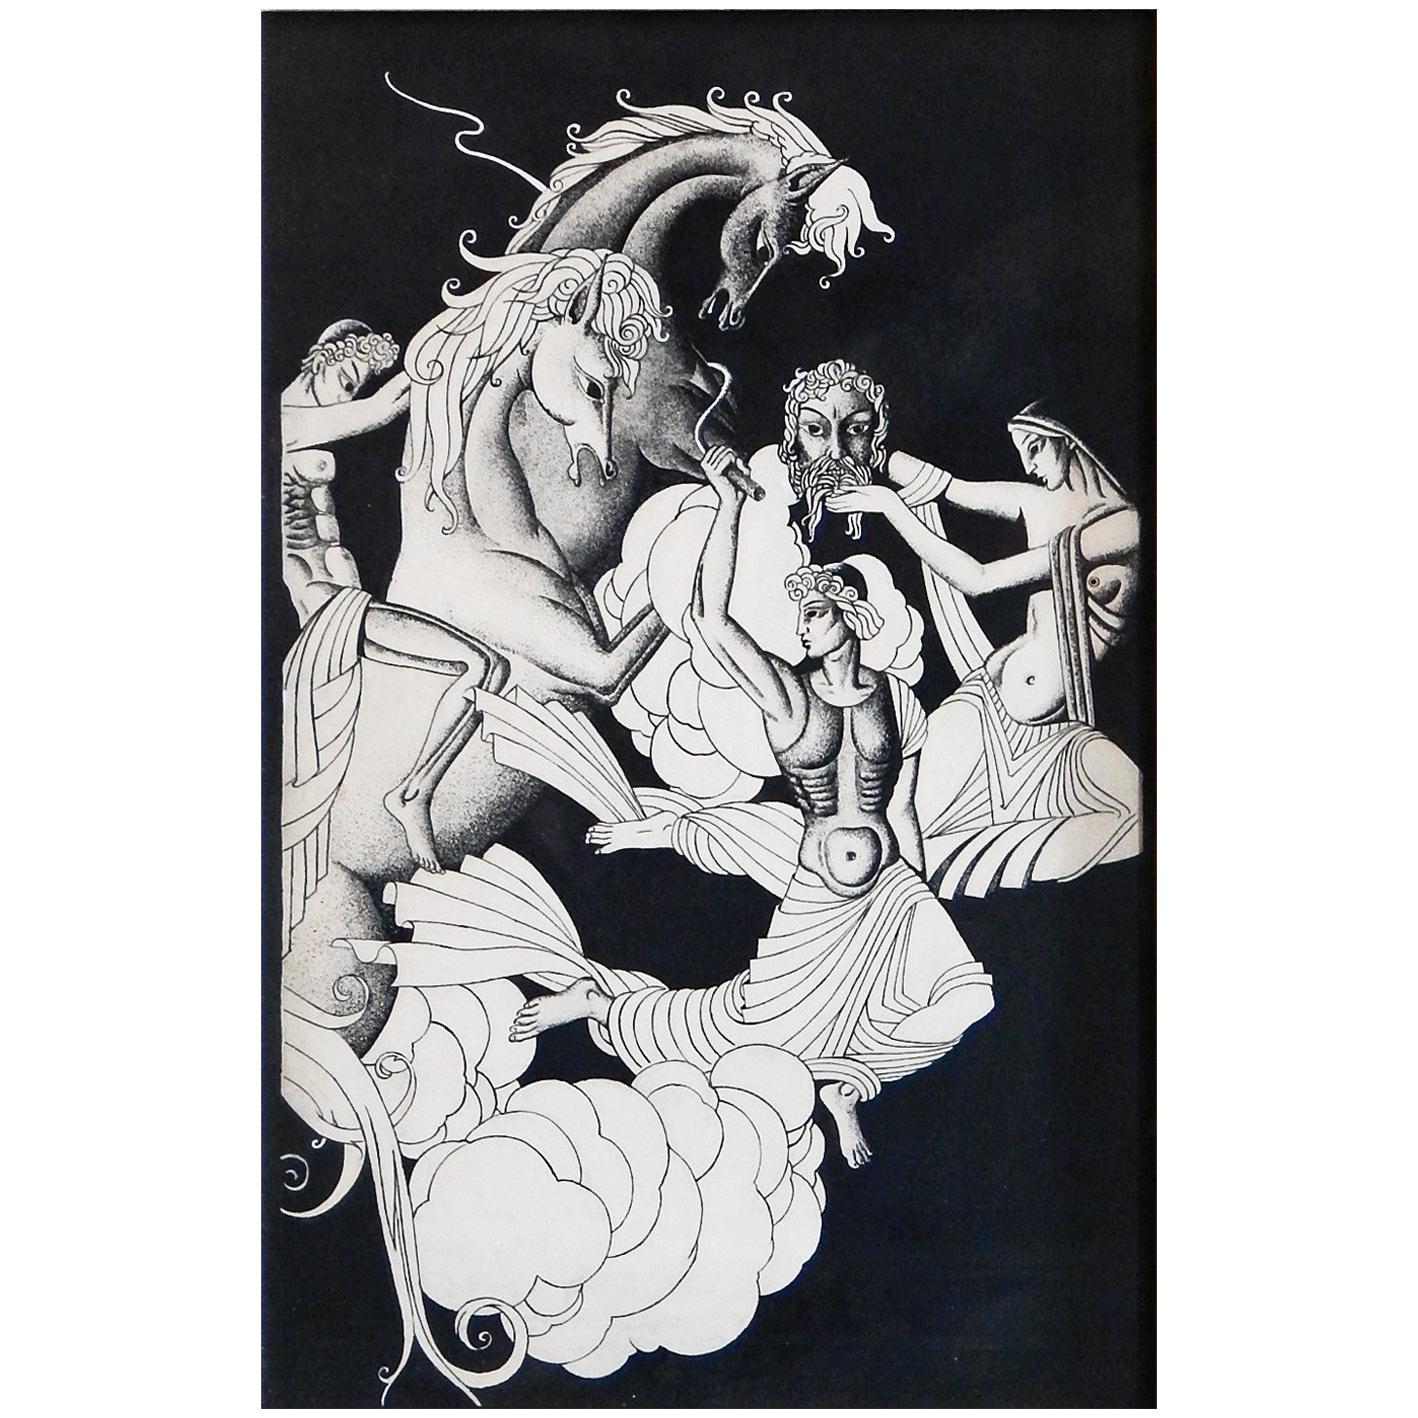 "Gods in the Sky," Tour de Force, High-Style Art Deco Ink Drawing with Nudes